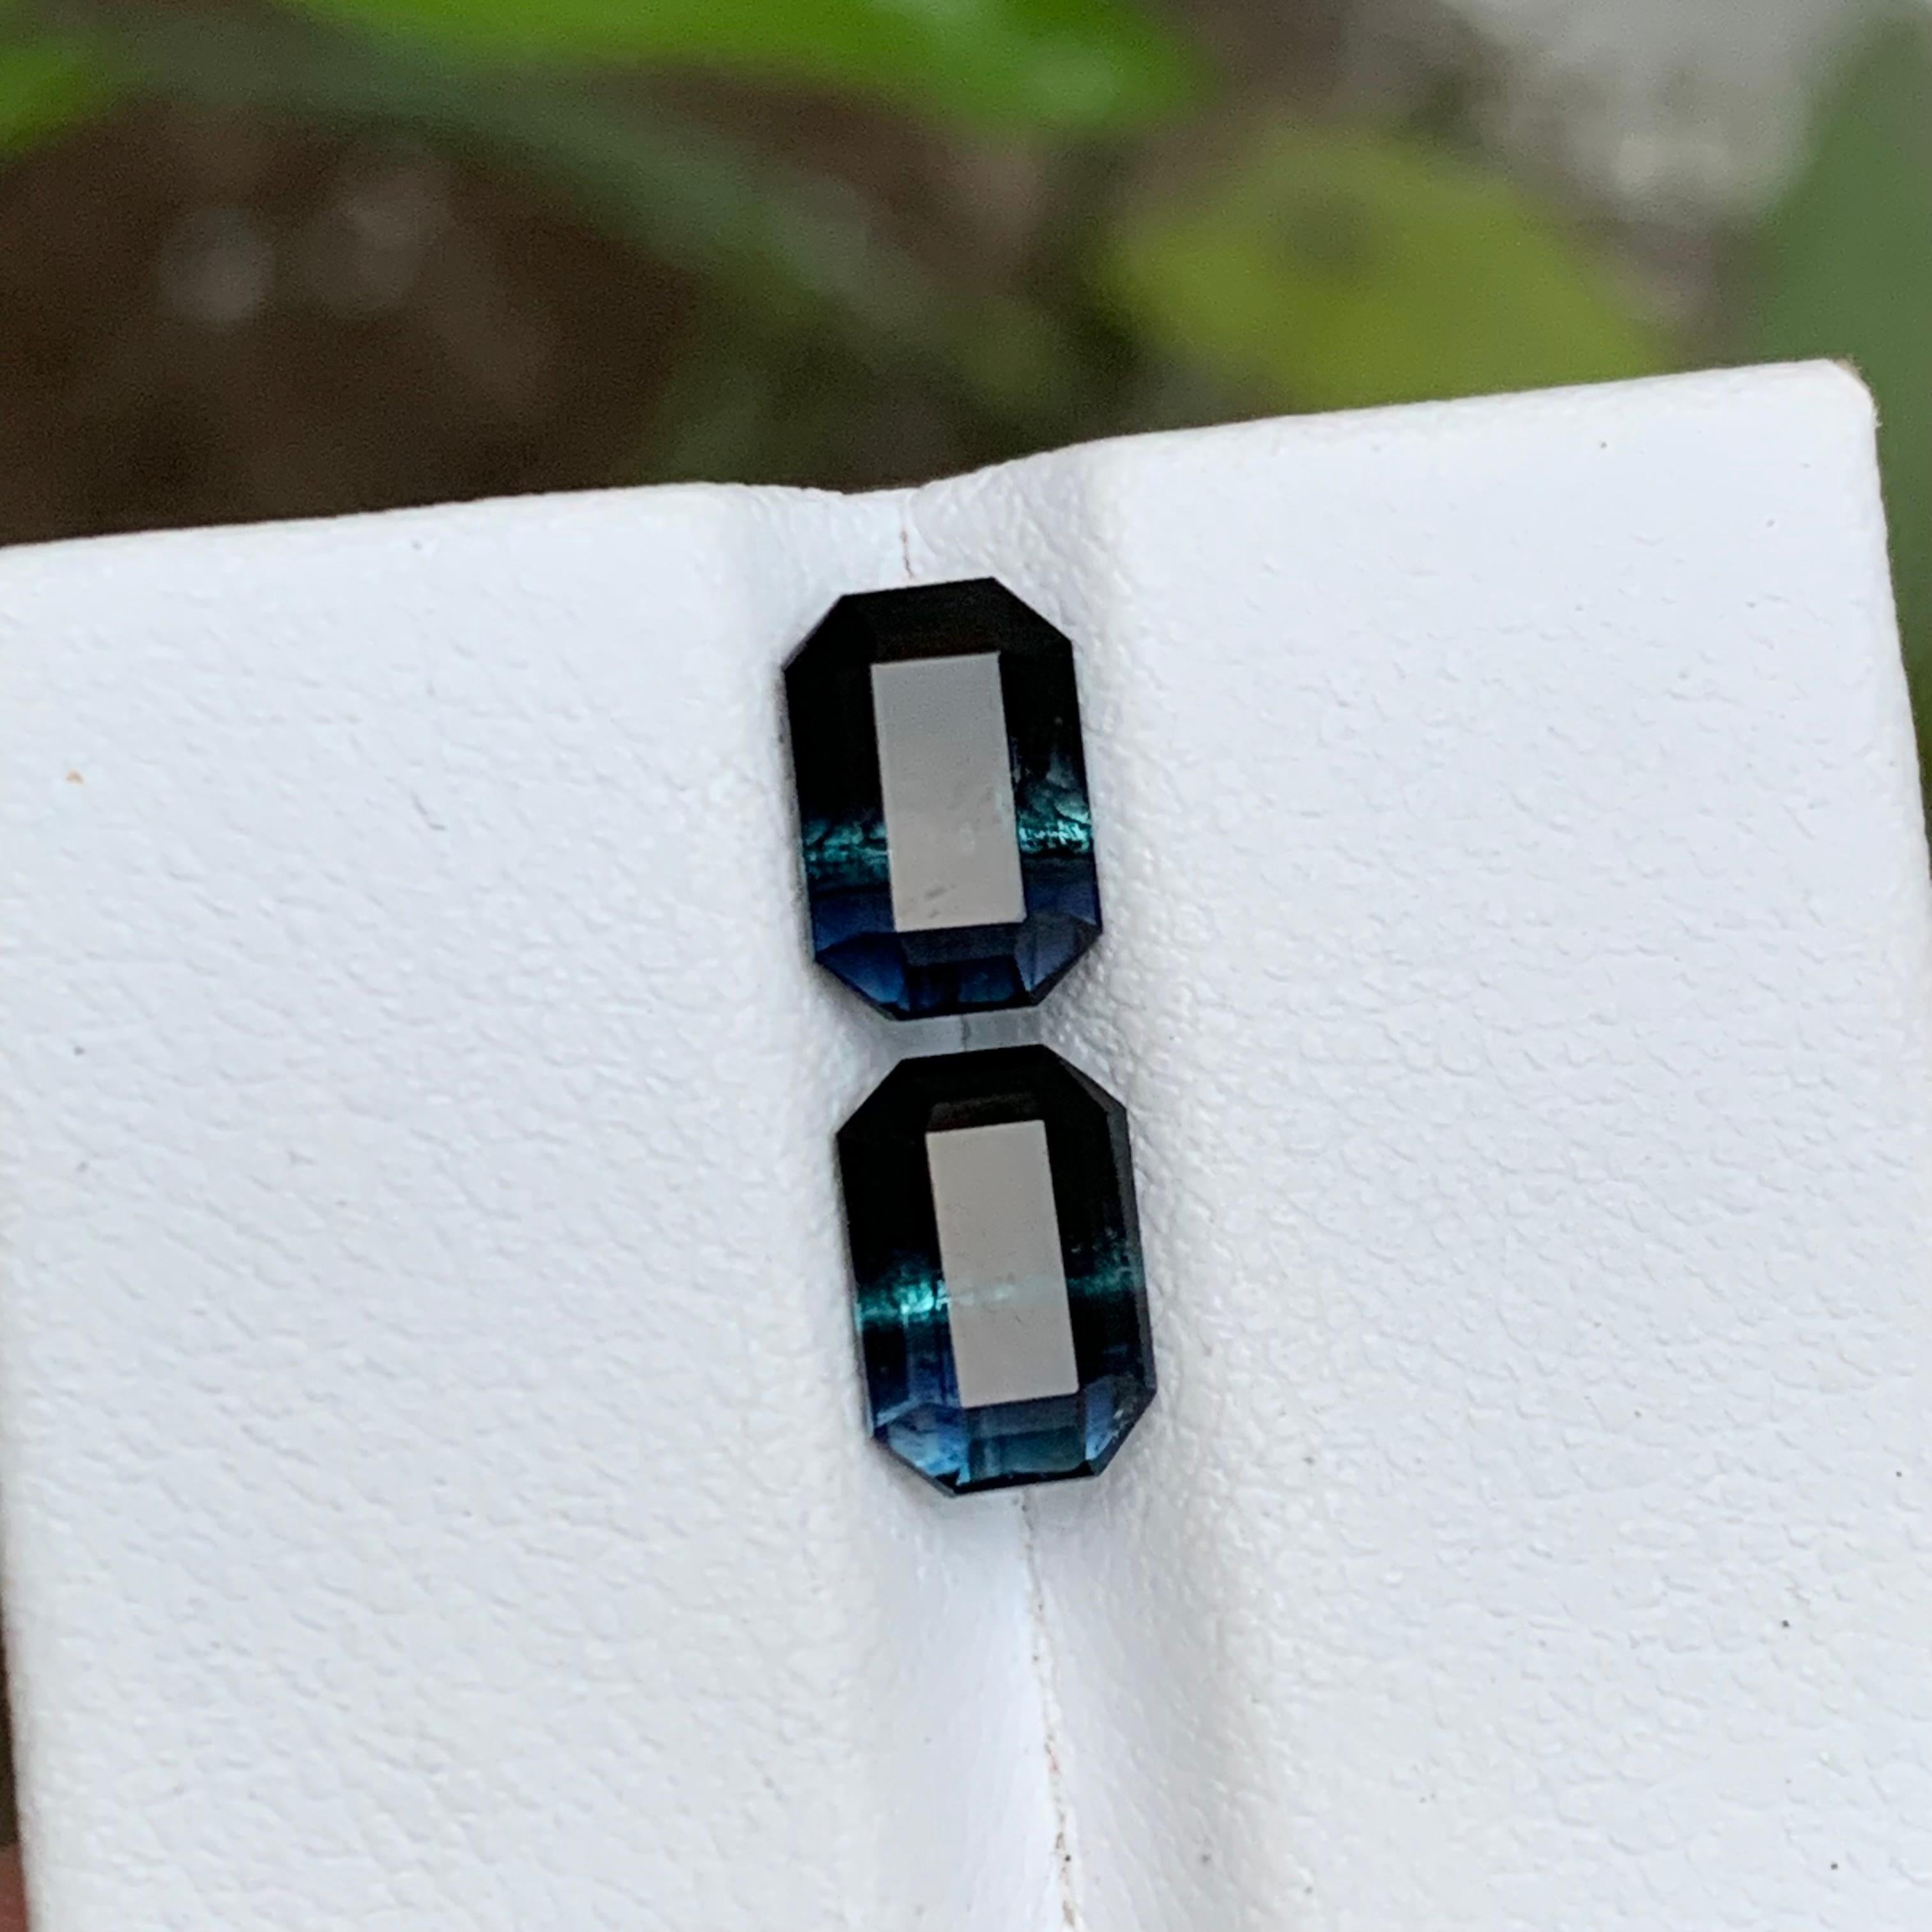 GEMSTONE TYPE: Tourmaline
PIECE(S): Pair
WEIGHT: 2.75 Carats
SHAPE: Emerald
SIZE (MM): 
1.45 Carat: 7.88 x 5.36 x 3.88
1.30 Carat: 7.91 x 5.32 x 3.54
COLOR: Bicolor Black and Blue
CLARITY: Slightly Included
TREATMENT: None
ORIGIN: